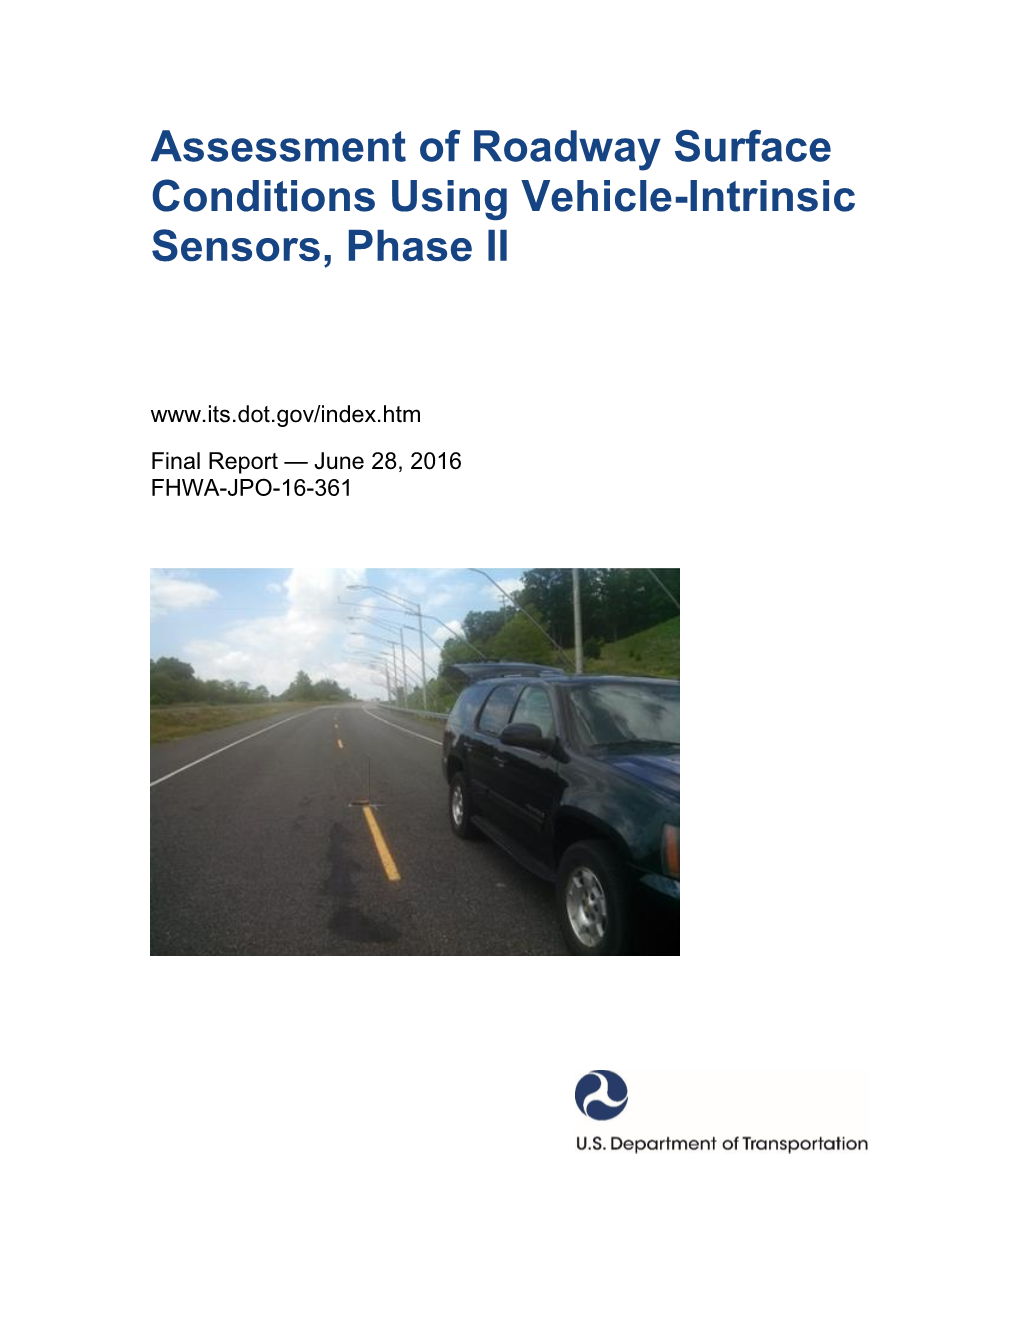 Assessment of Roadway Surface Conditions Using Vehicle-Intrinsic Sensors, Phase II